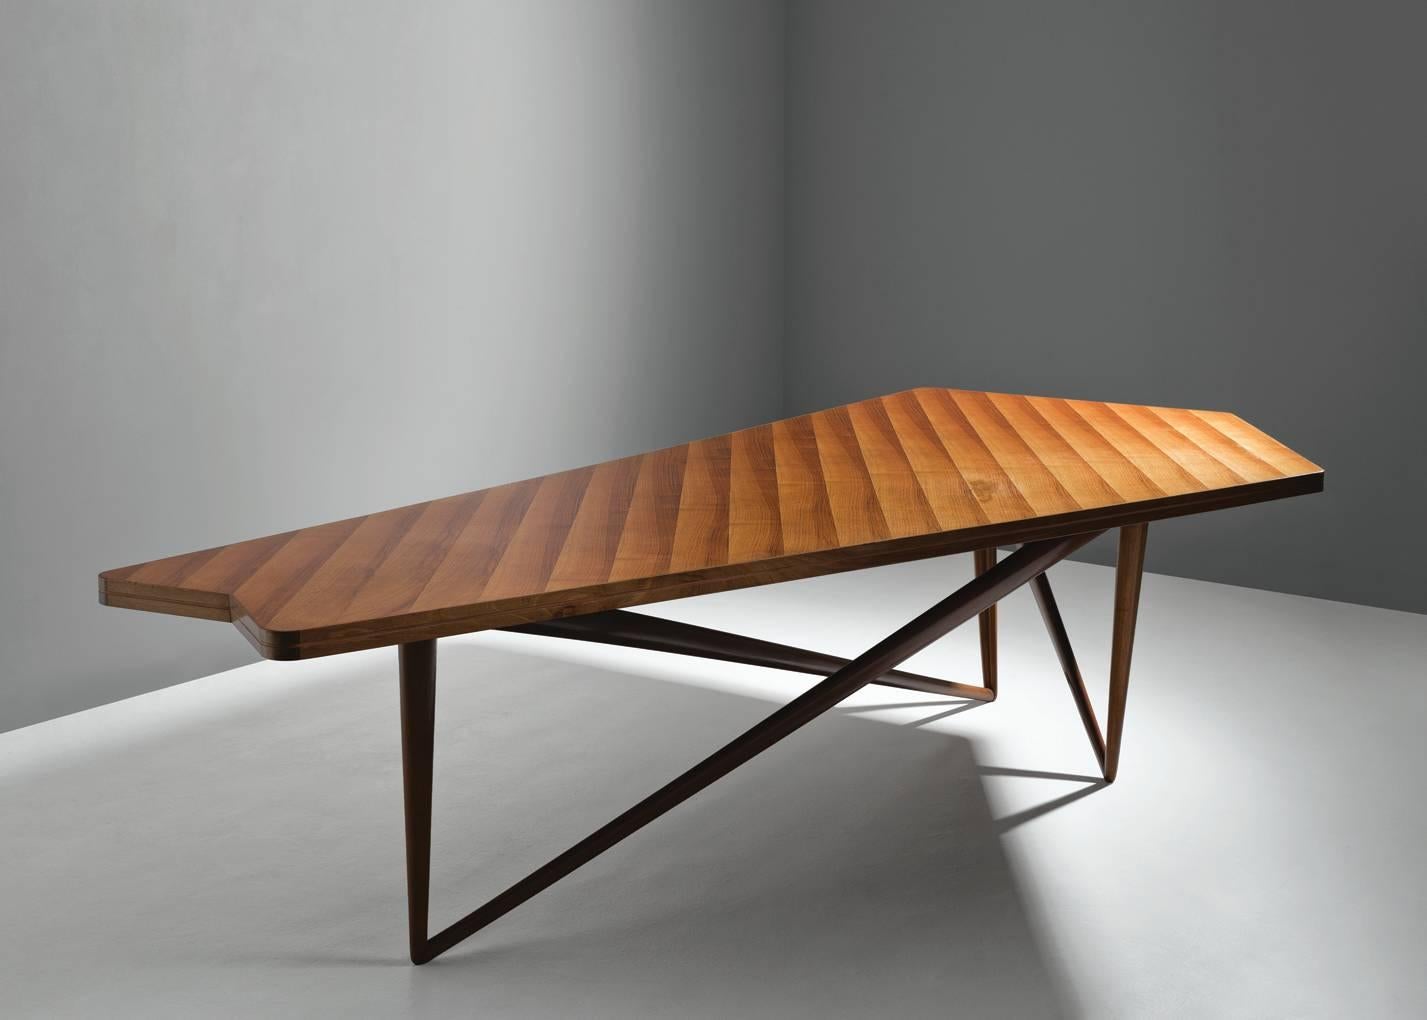 Table, in walnut, by Pierluigi Giordani for Falegnameria di Bologna, Italy, circa 1953.

Large a-symmetrical conference table in walnut by Italian designer Pierluigi Giordano. This table was specially made for the board of directors from an